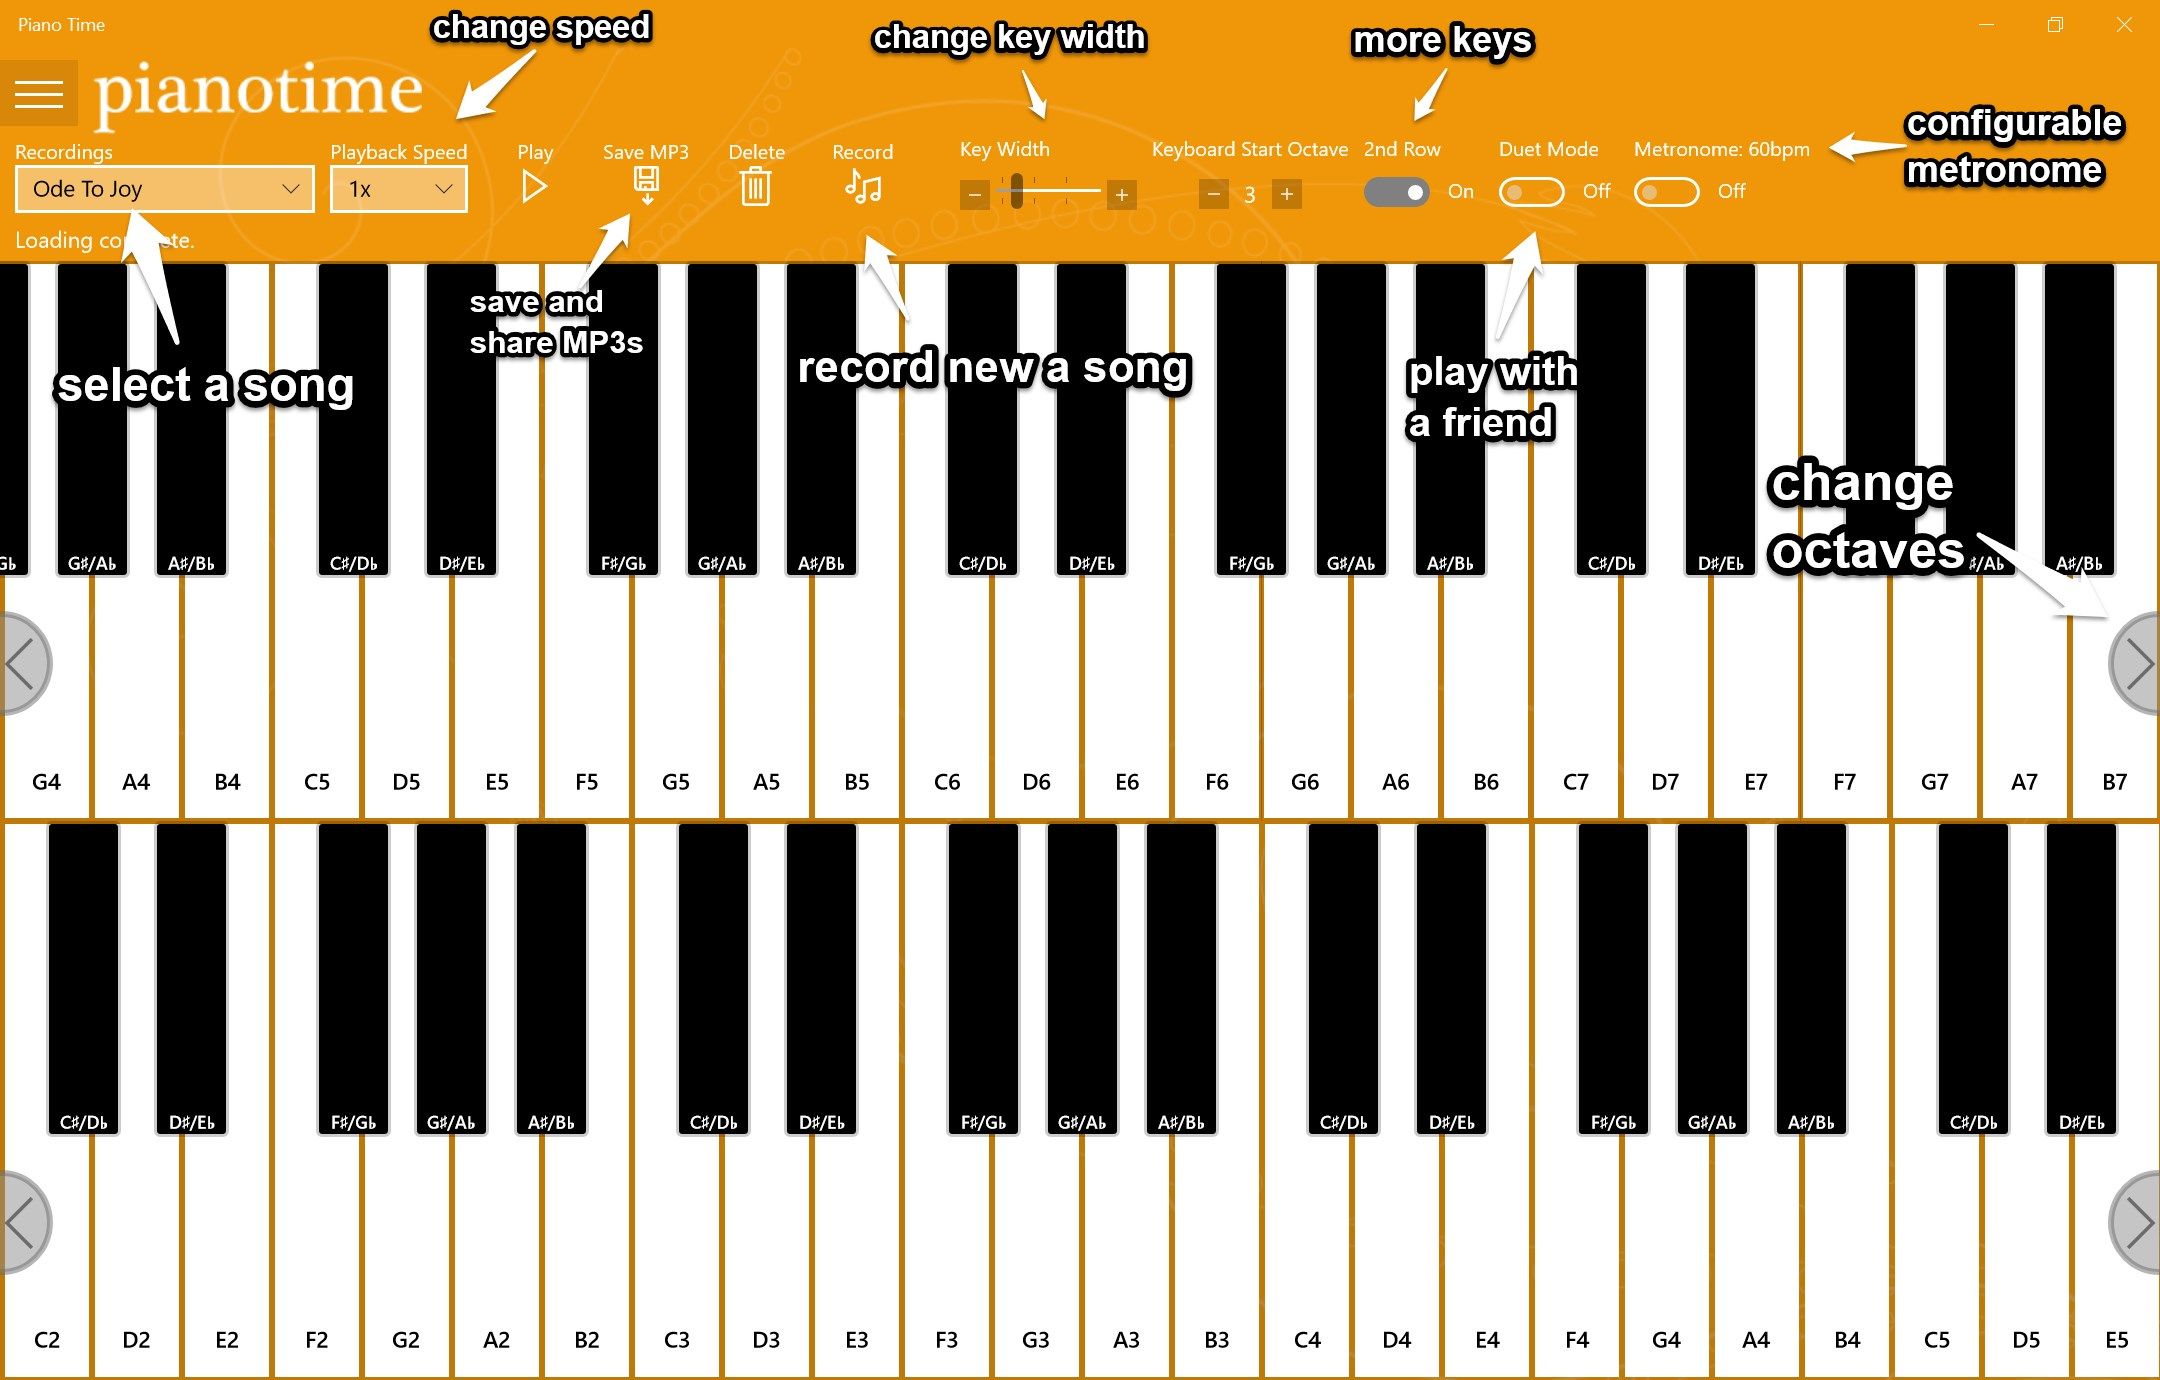 All the options you need; Save MP3s, multiple octaves, change playback speed, configurable metronome, change width of keys